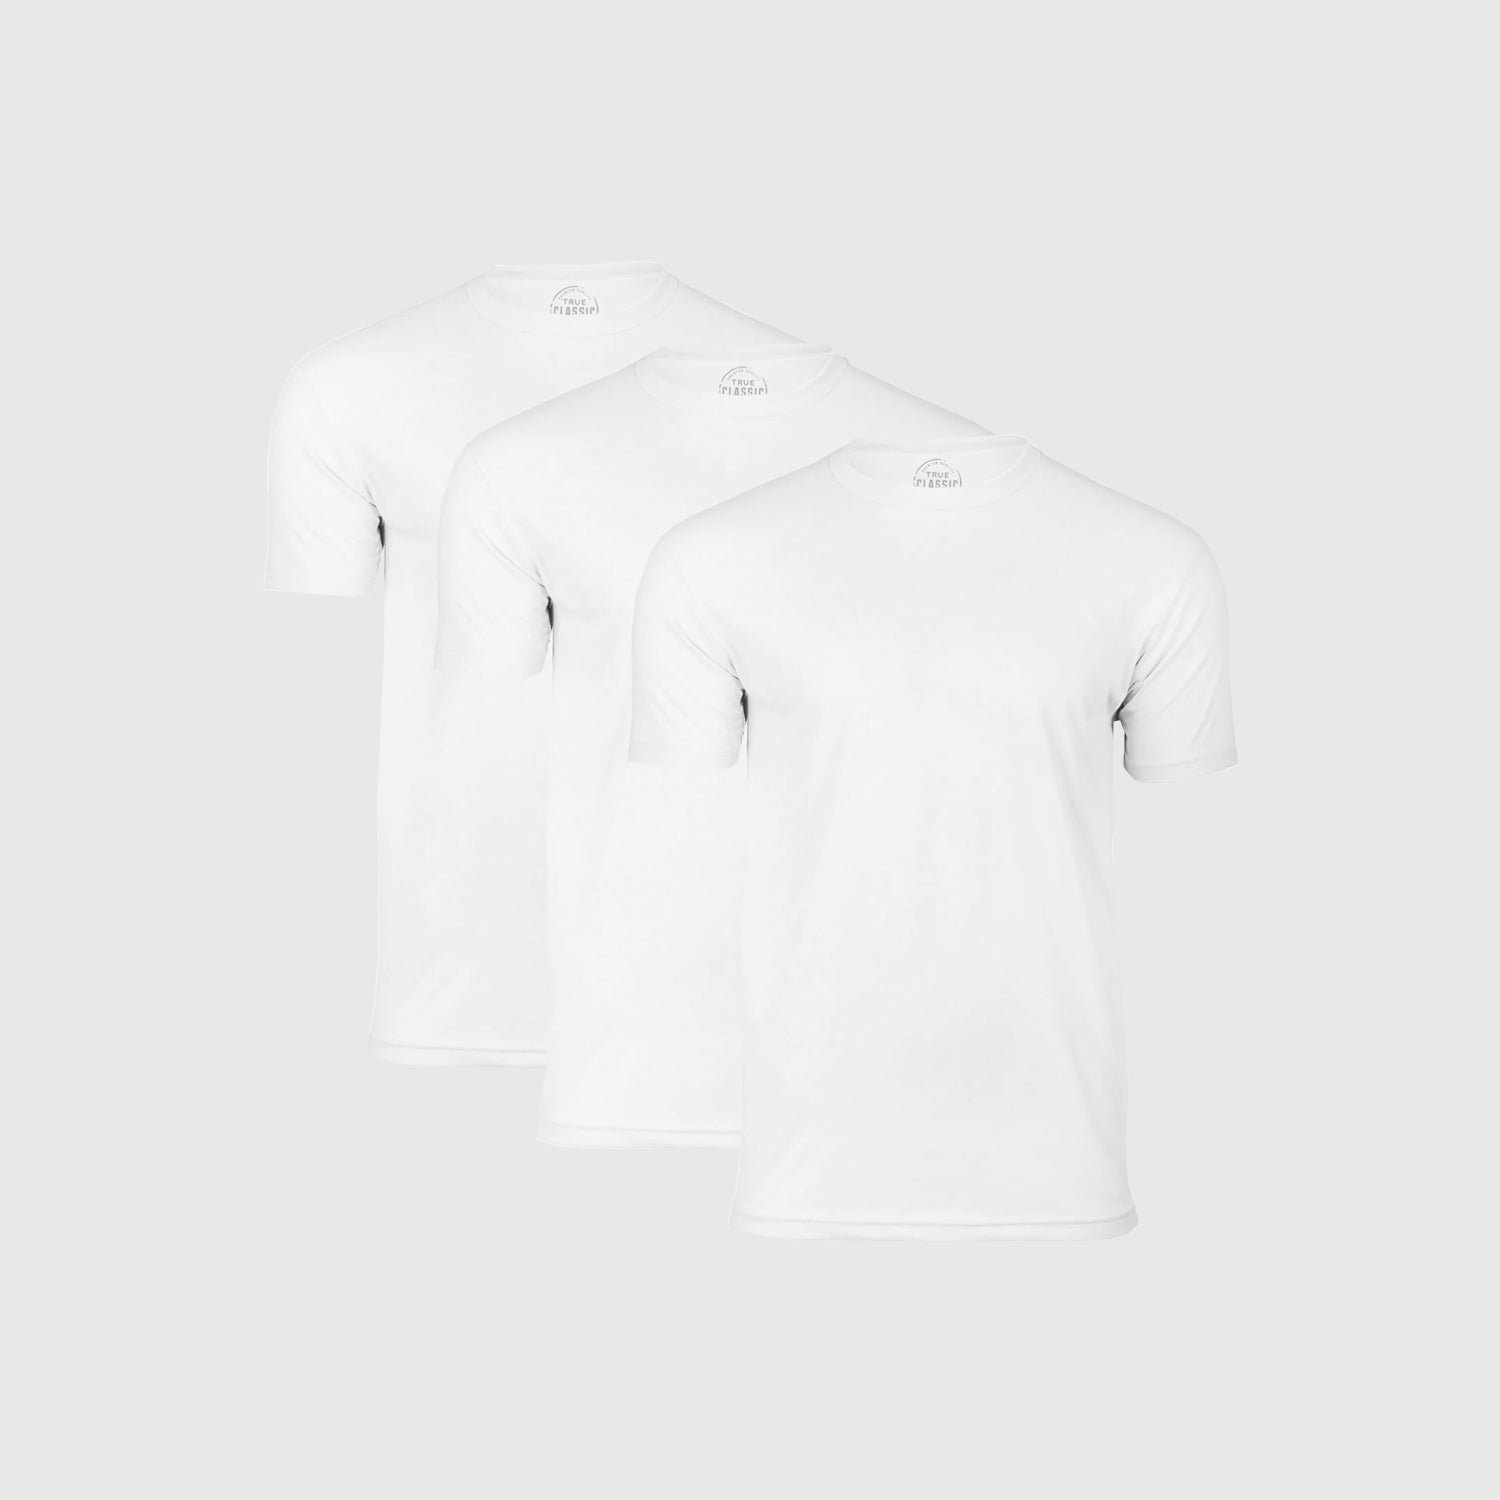 6-14 YEARS/ TWO-PACK OF BASIC T-SHIRTS - White